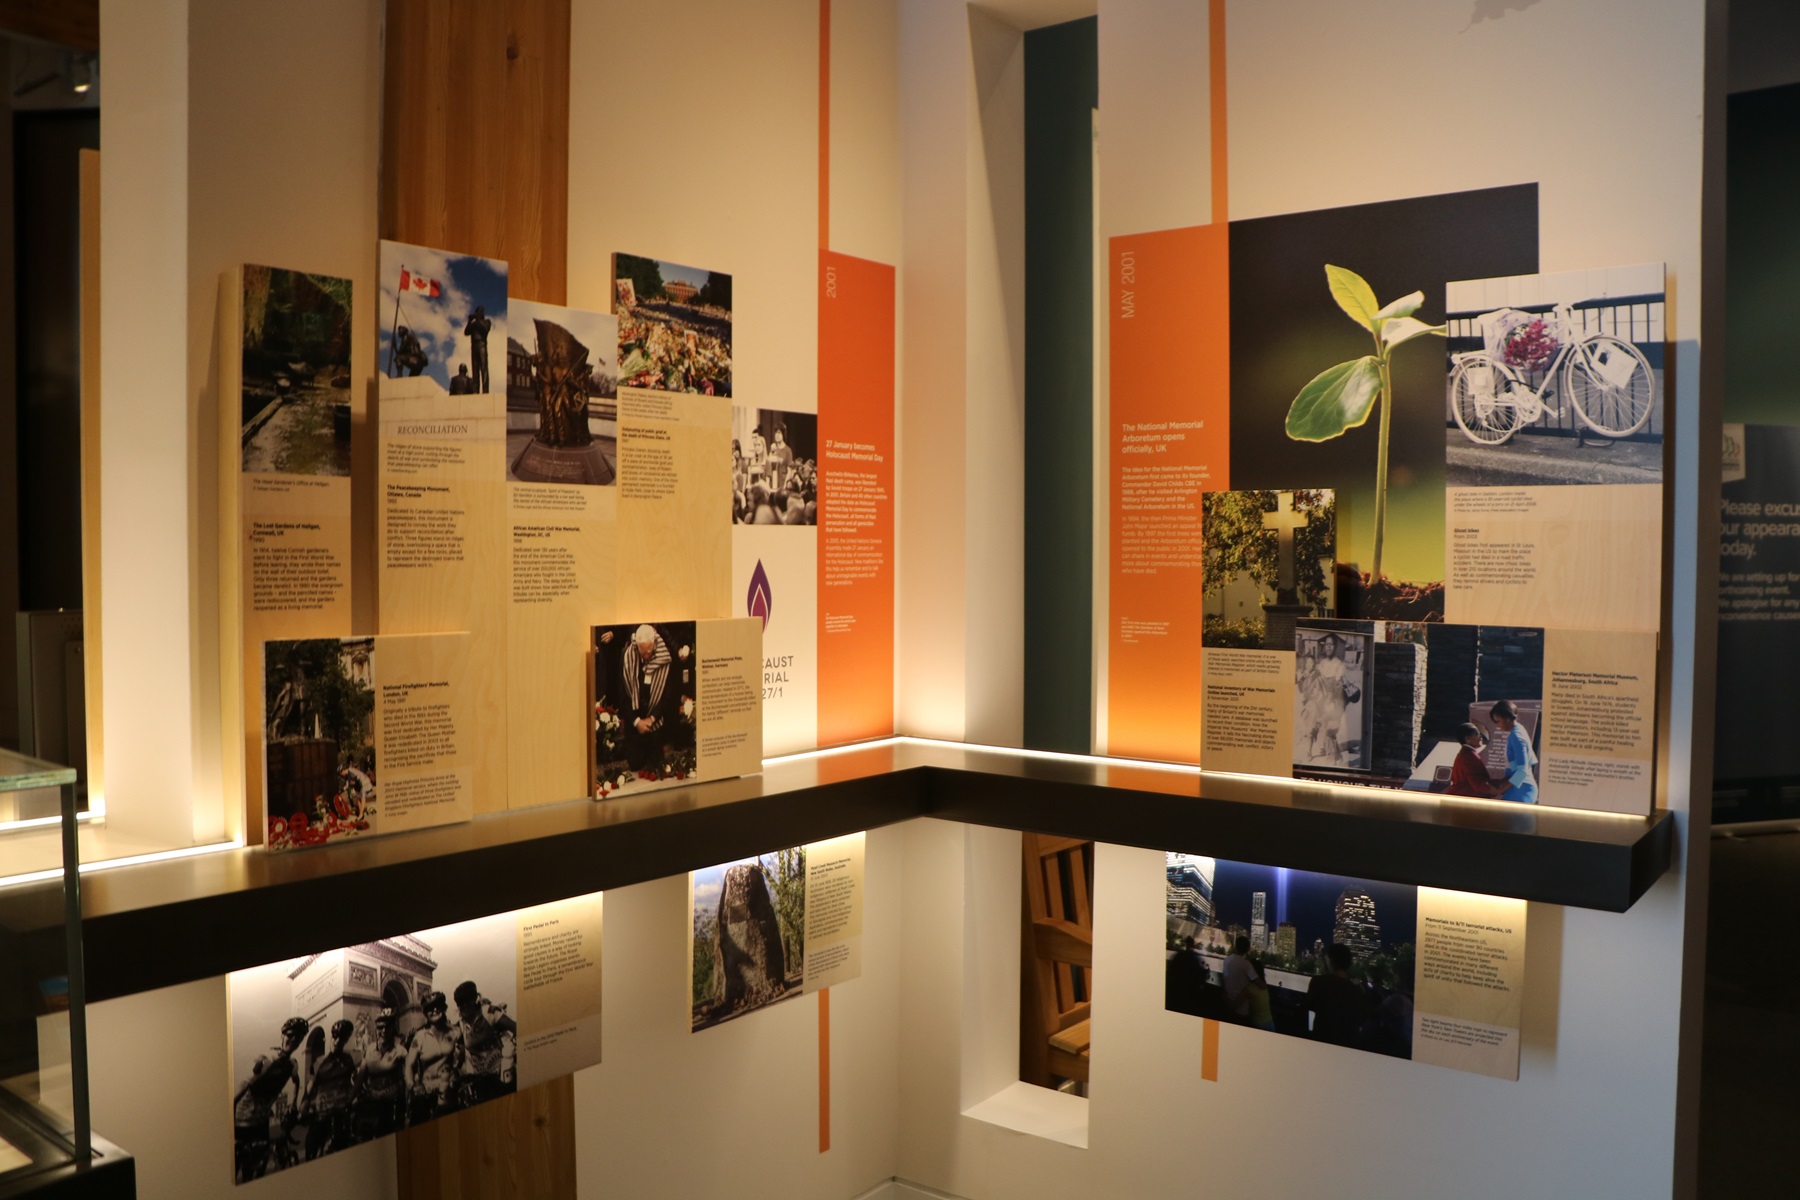 One of the walls showing a timeline of Remembrance in the exhibition